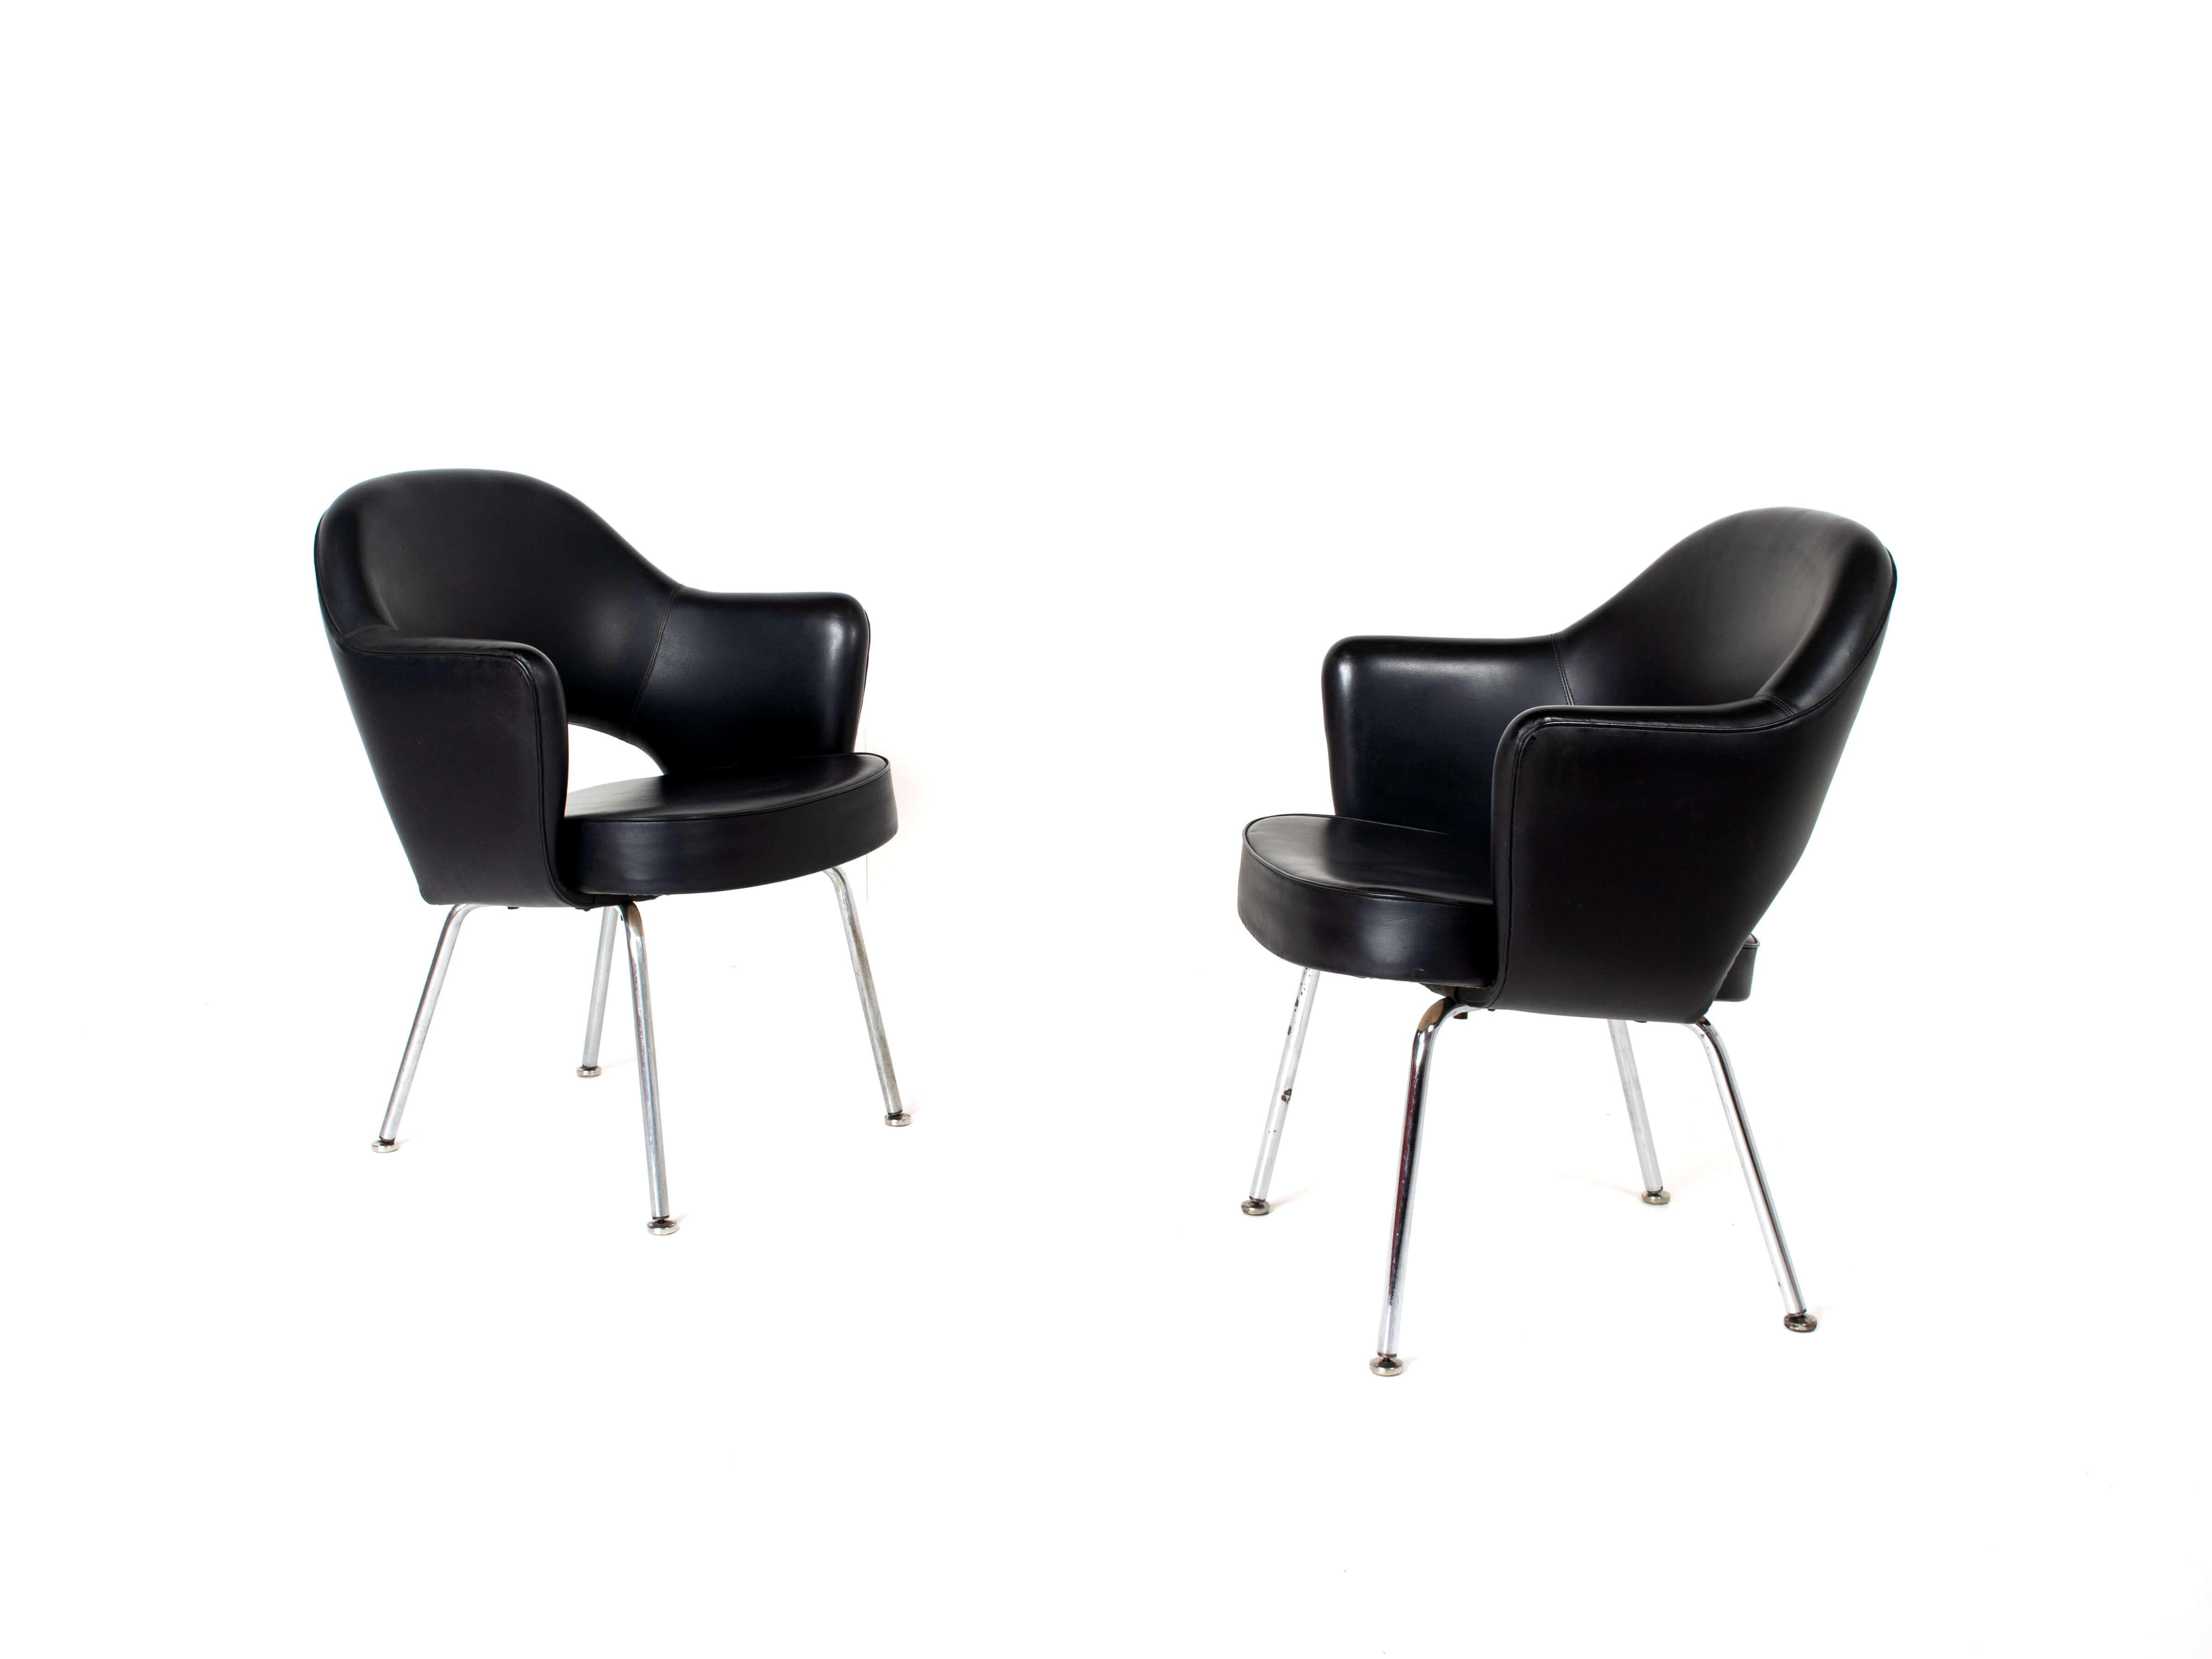 Black leather upholstery with chrome / nickel tubular legs, finished with round feet. Both chairs are in good condition; one chair has a small dent in the leather as per picture. The feet underneath the legs can be used to adjust the chair. One